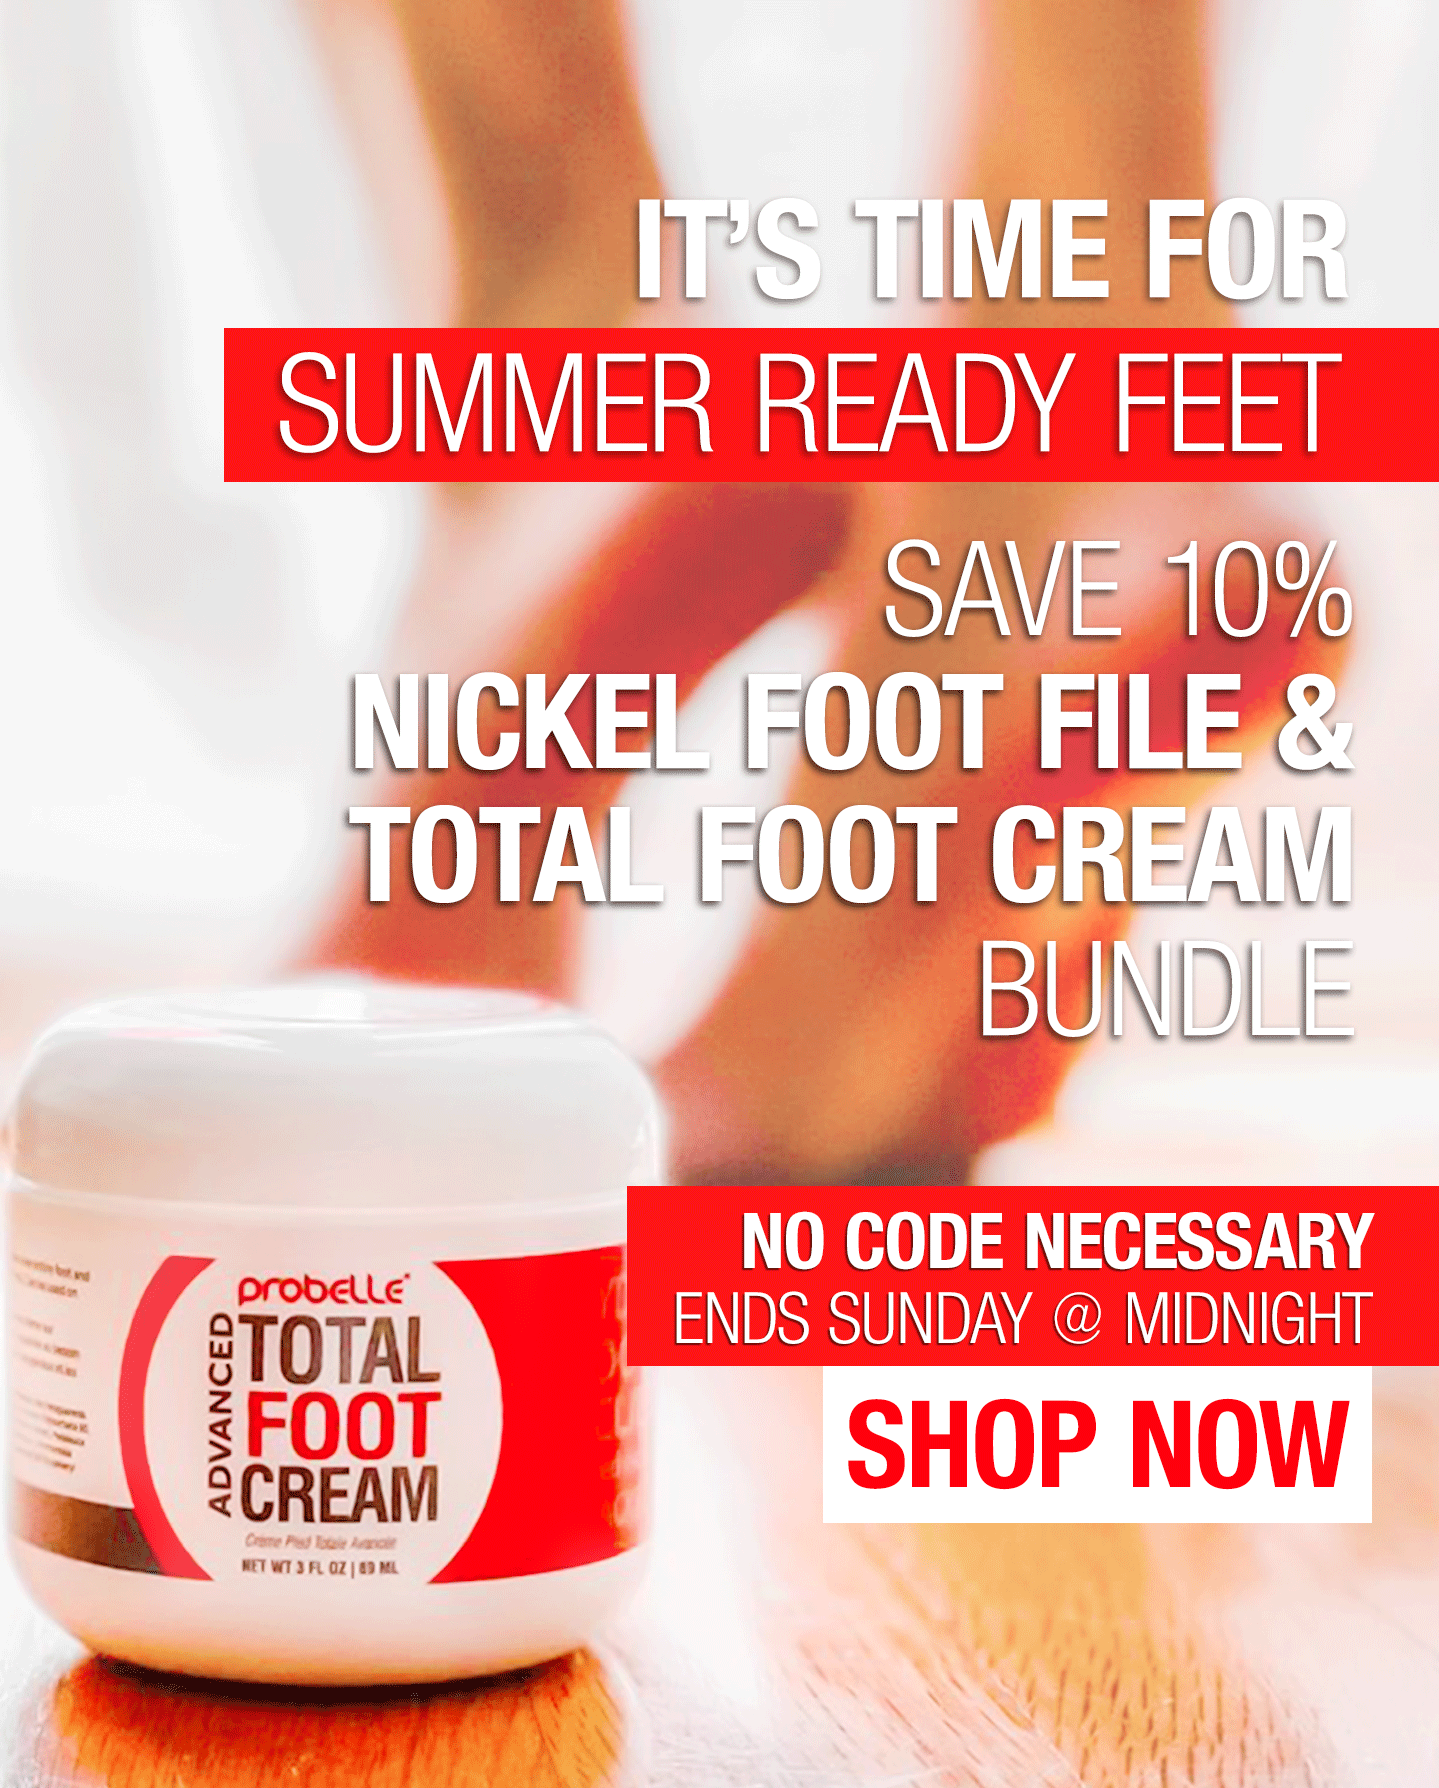 Bundle and Save 10% on the Probelle Nickel foot file & advanced total foot cream